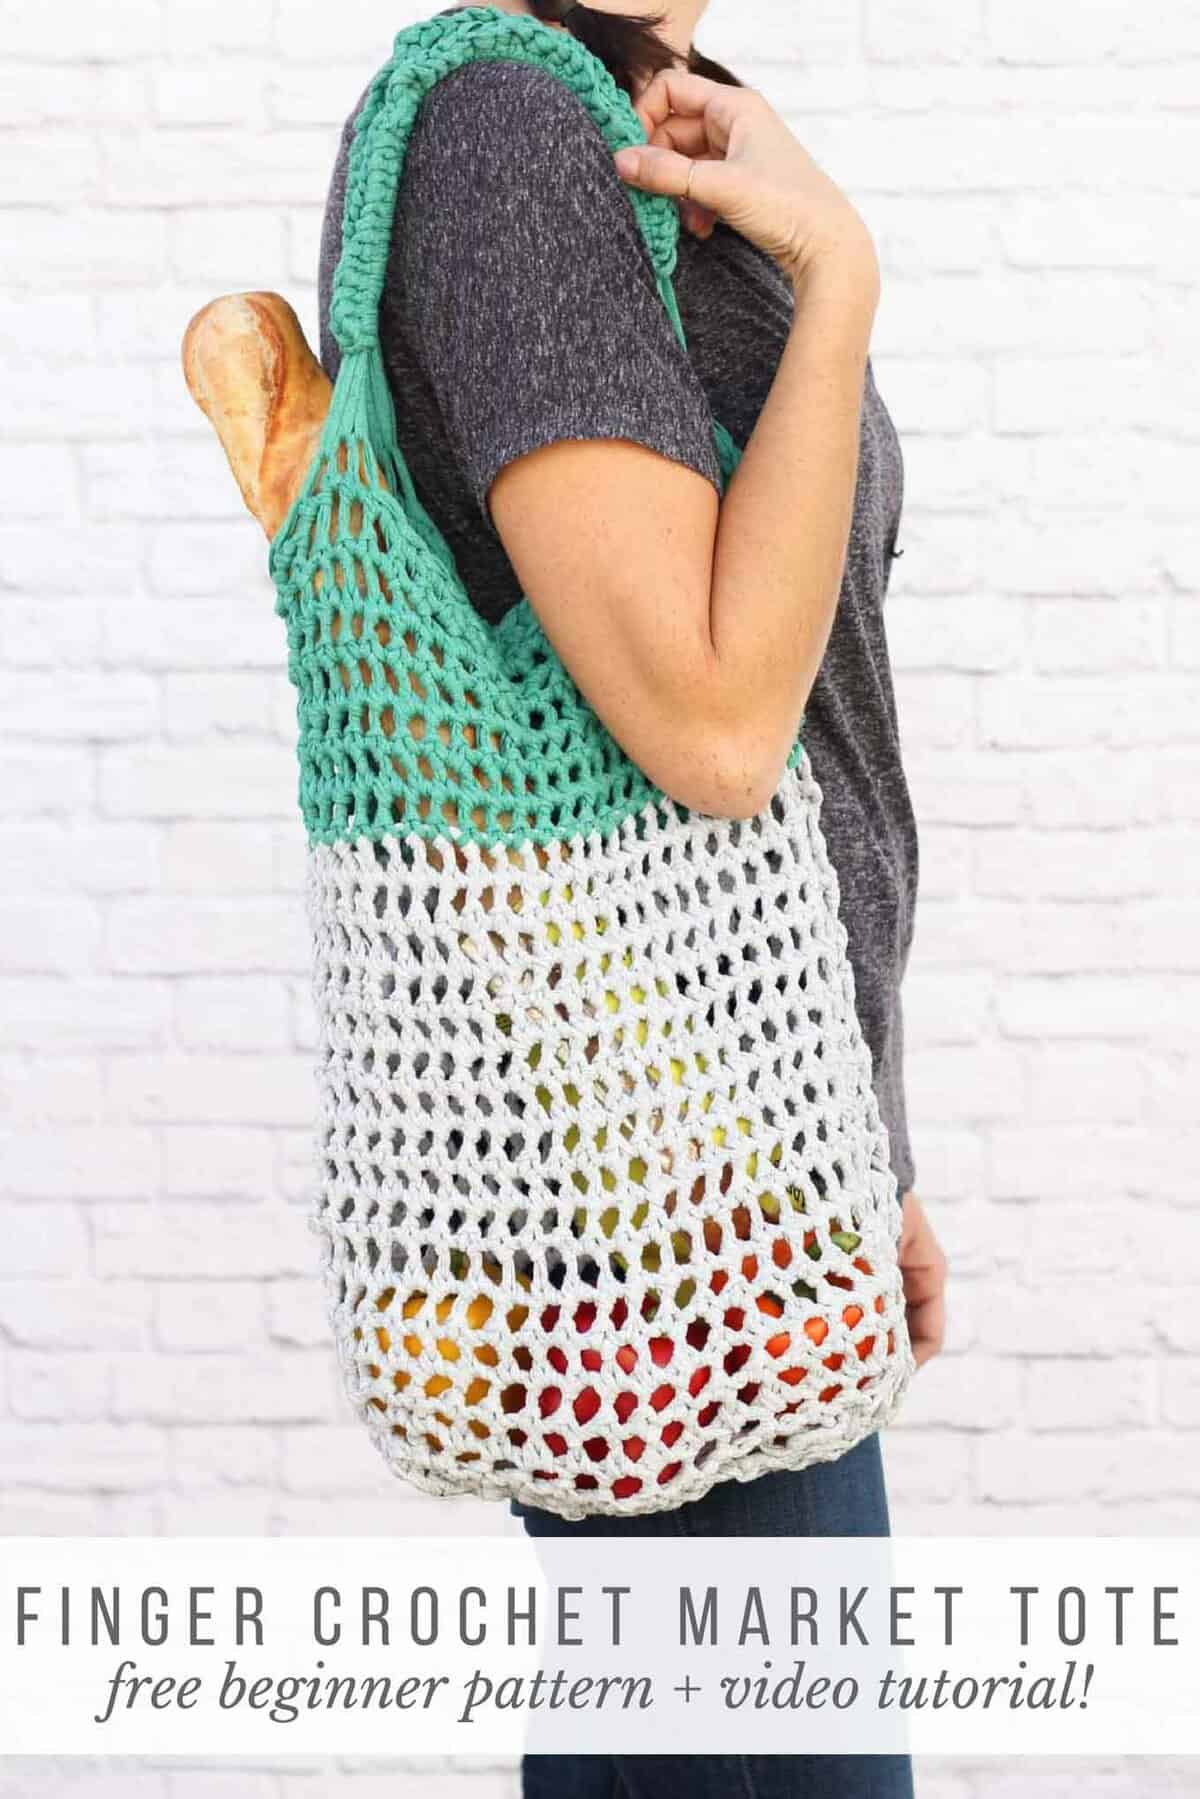 This free market tote bag pattern and video tutorial is the perfect introduction on how to finger crochet! A speedy, satisfying project for adults and kids alike. Made using Lion Brand's Fast-Track yarn in "Chopper Grey" and "Go Kart Green." | MakeAndDoCrew.com